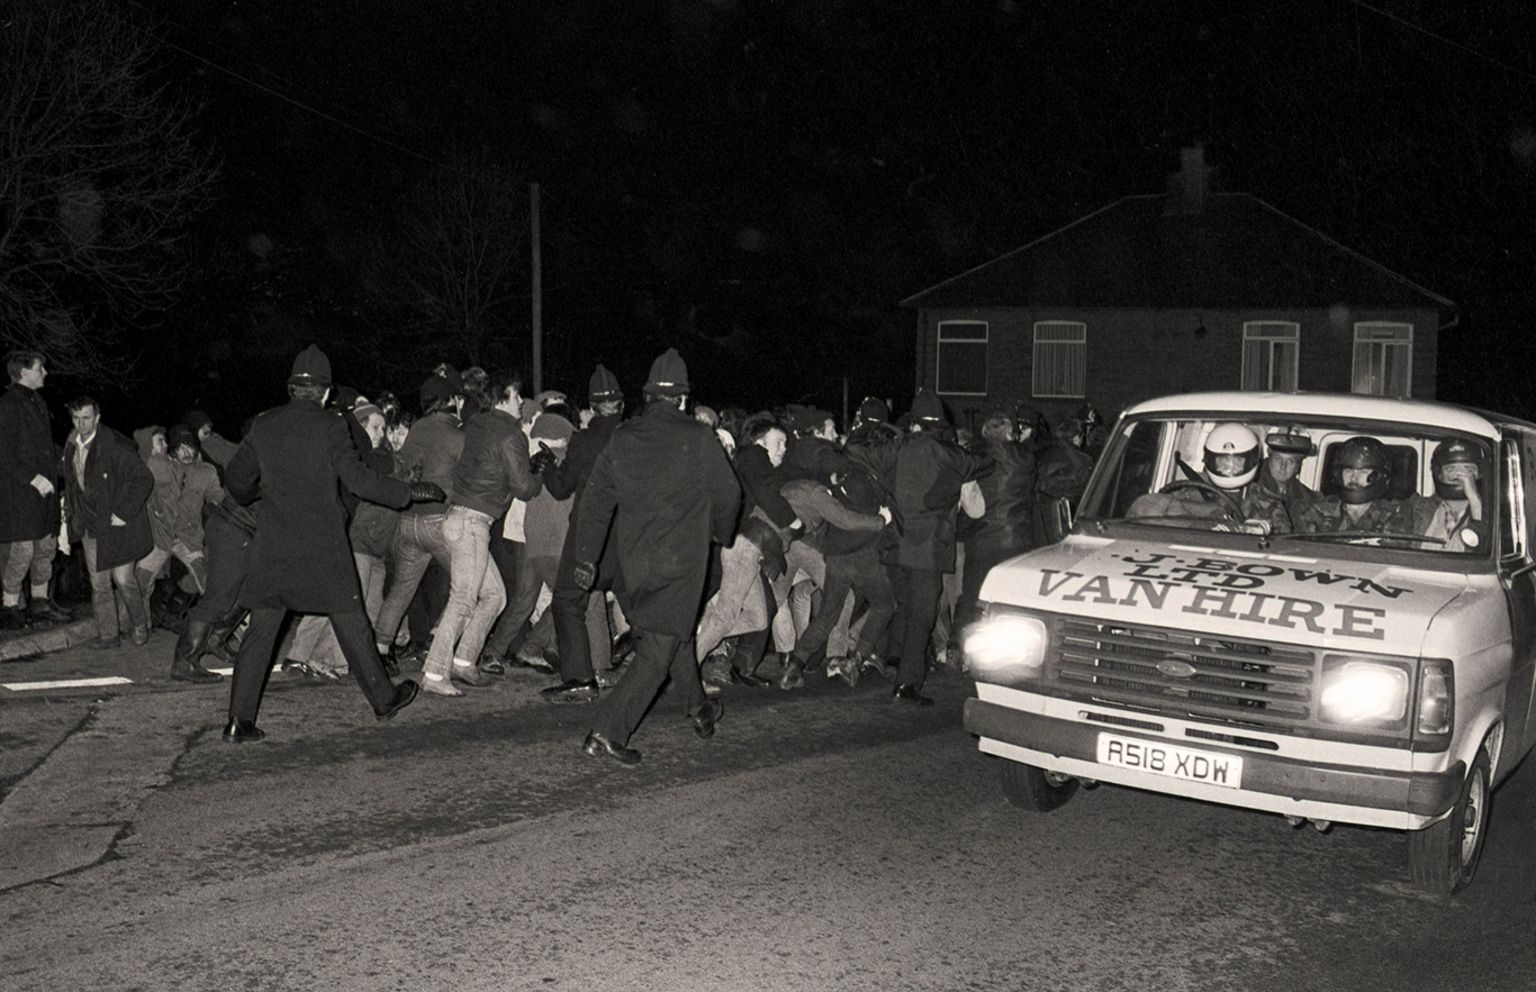 Working miners broke through the picket line at Celynen South Colliery in Newbridge during the miners' strike